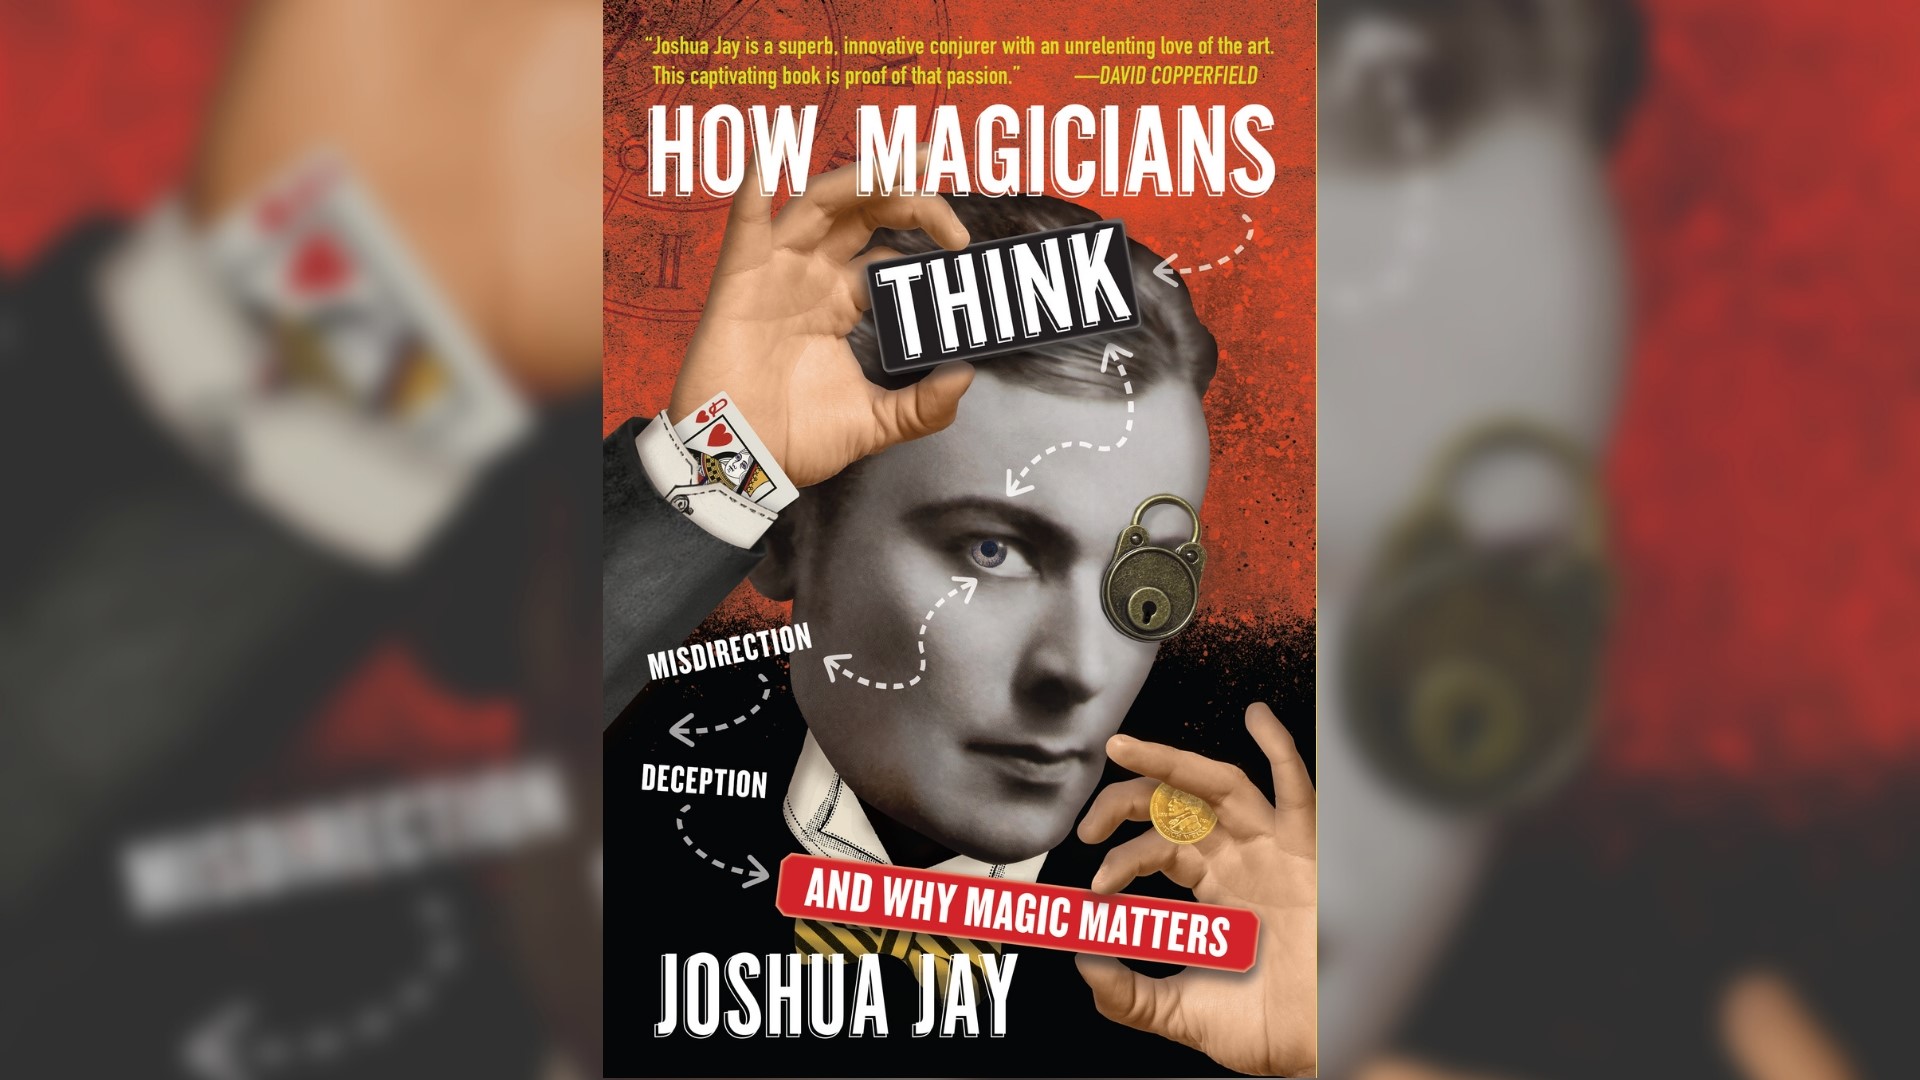 "How Magicians Think and Why Magic Matters" by Joshua Jay unlocks an inside peek at the artistry, history, and traditions of magic. #newdaynw